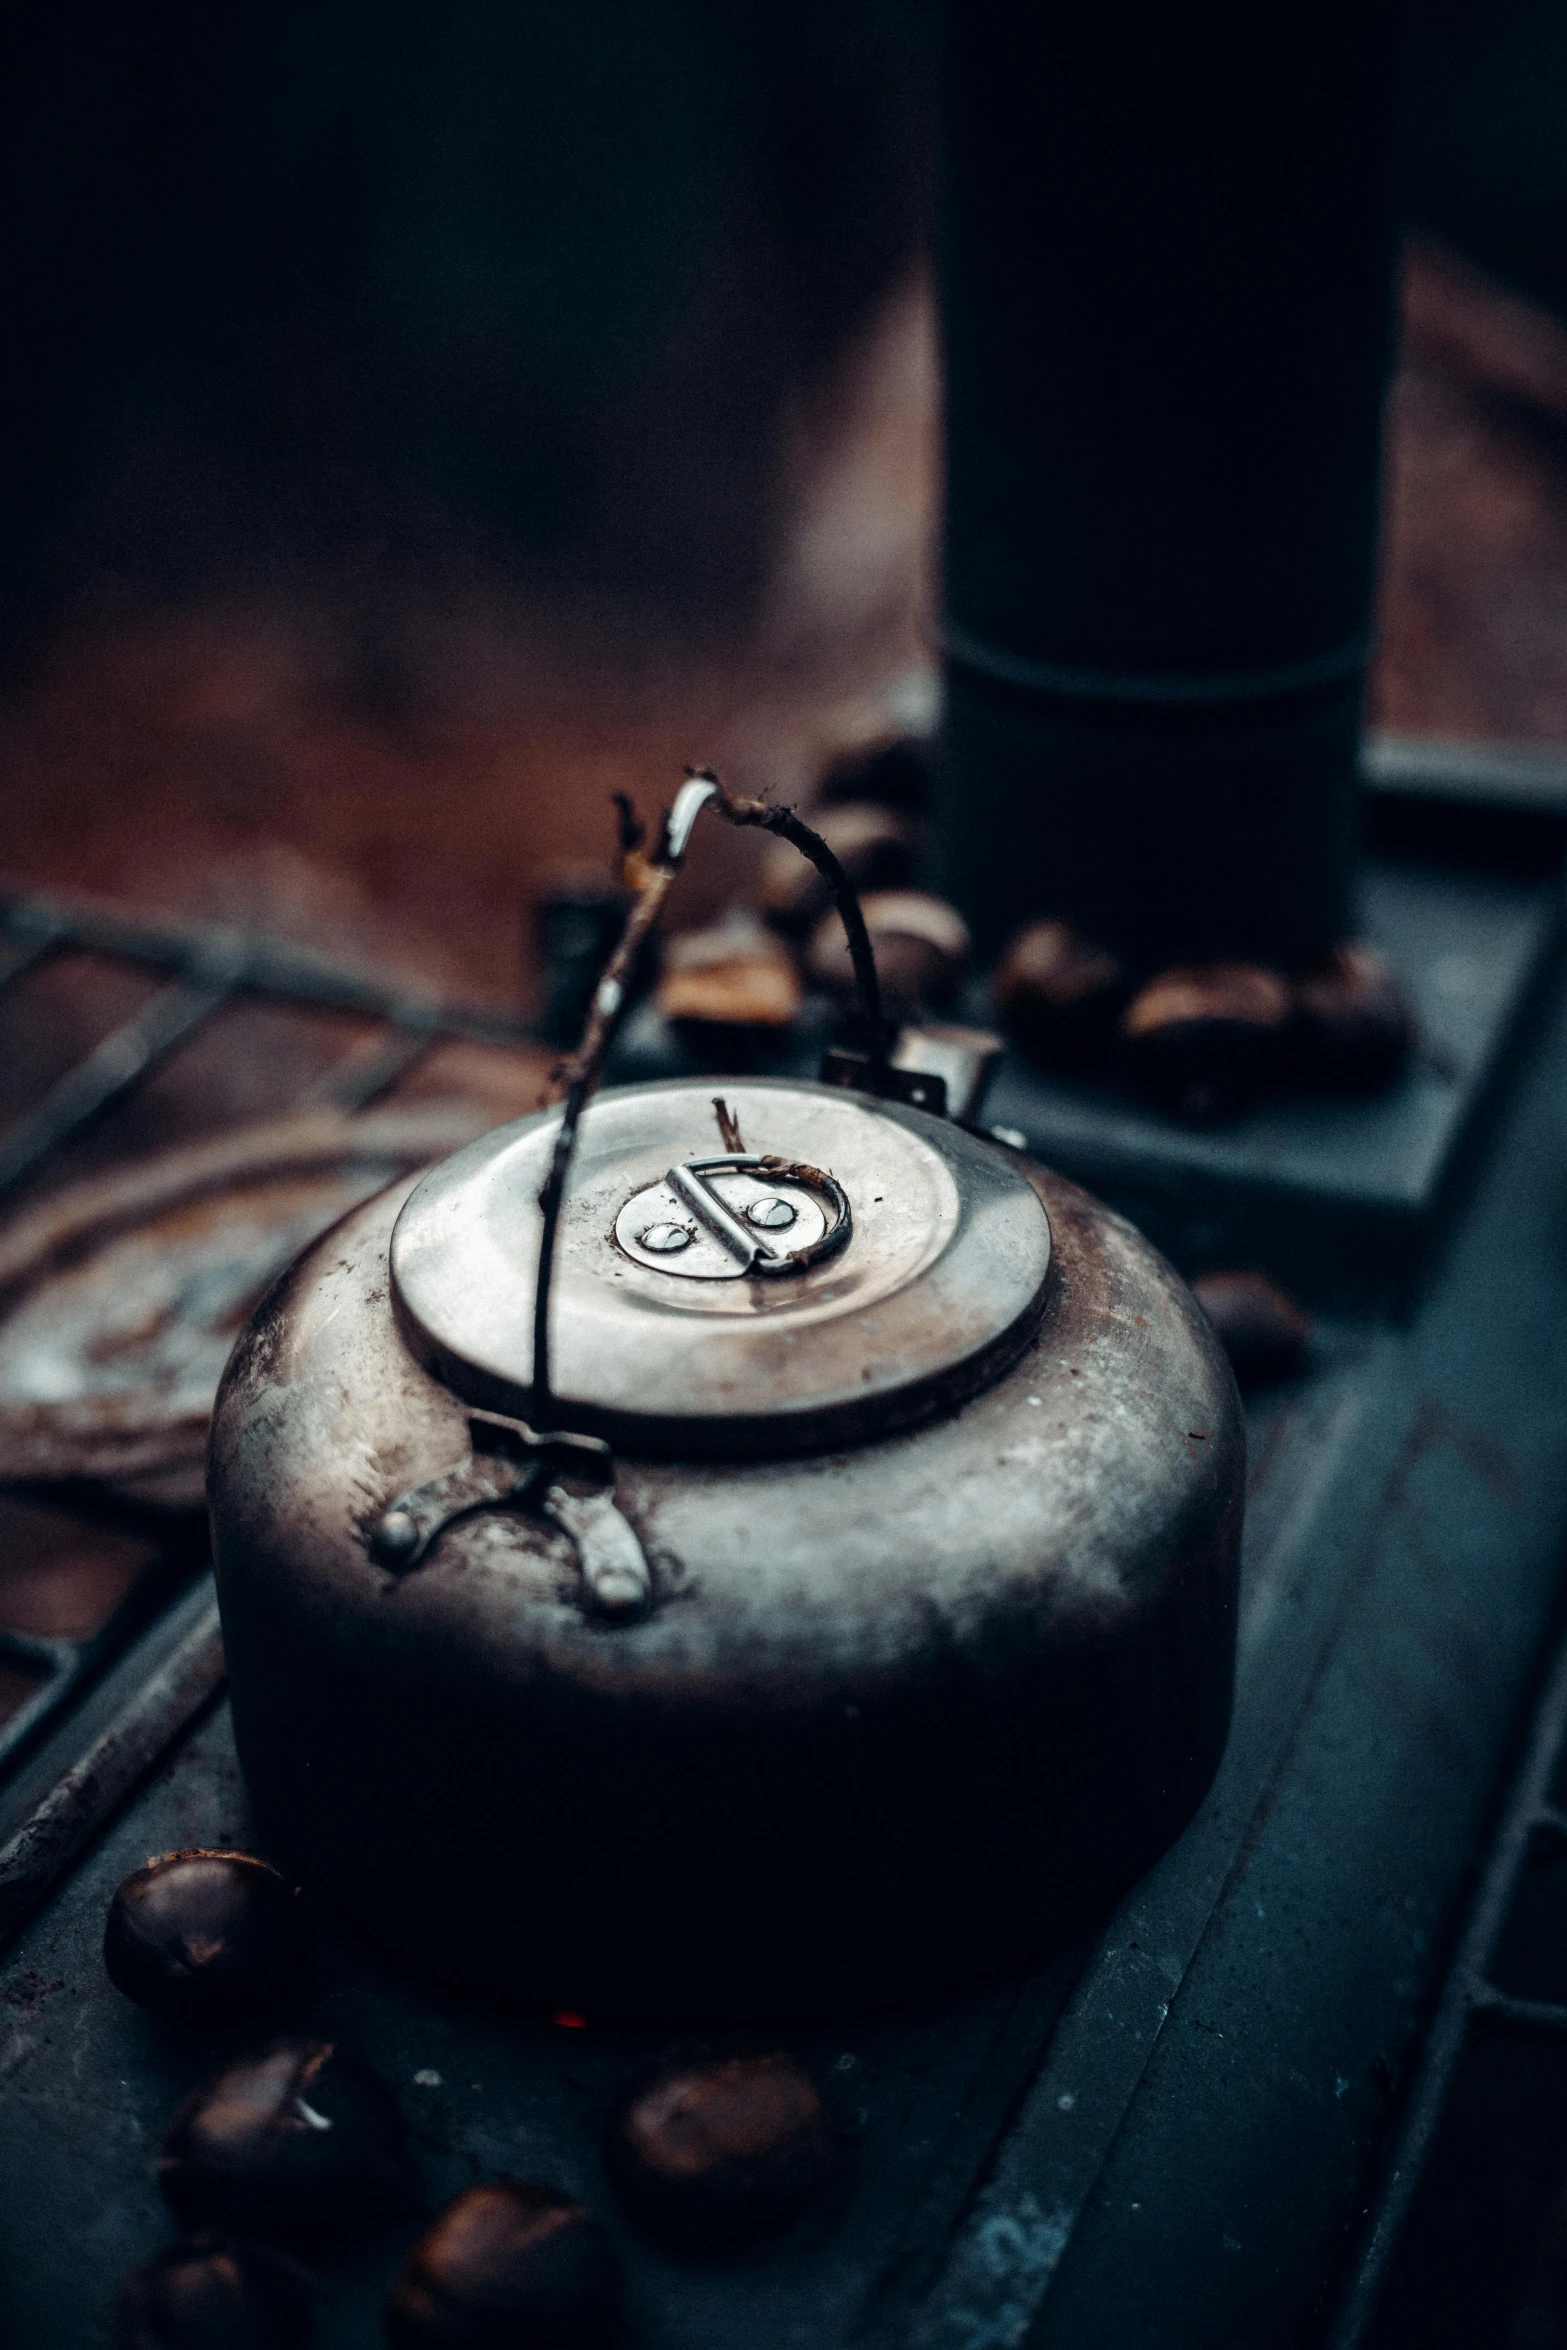 a tea kettle sitting on top of a wooden table, by Jan Tengnagel, trending on pexels, auto-destructive art, postapocalyptic vibes, stove, high angle close up shot, lantern